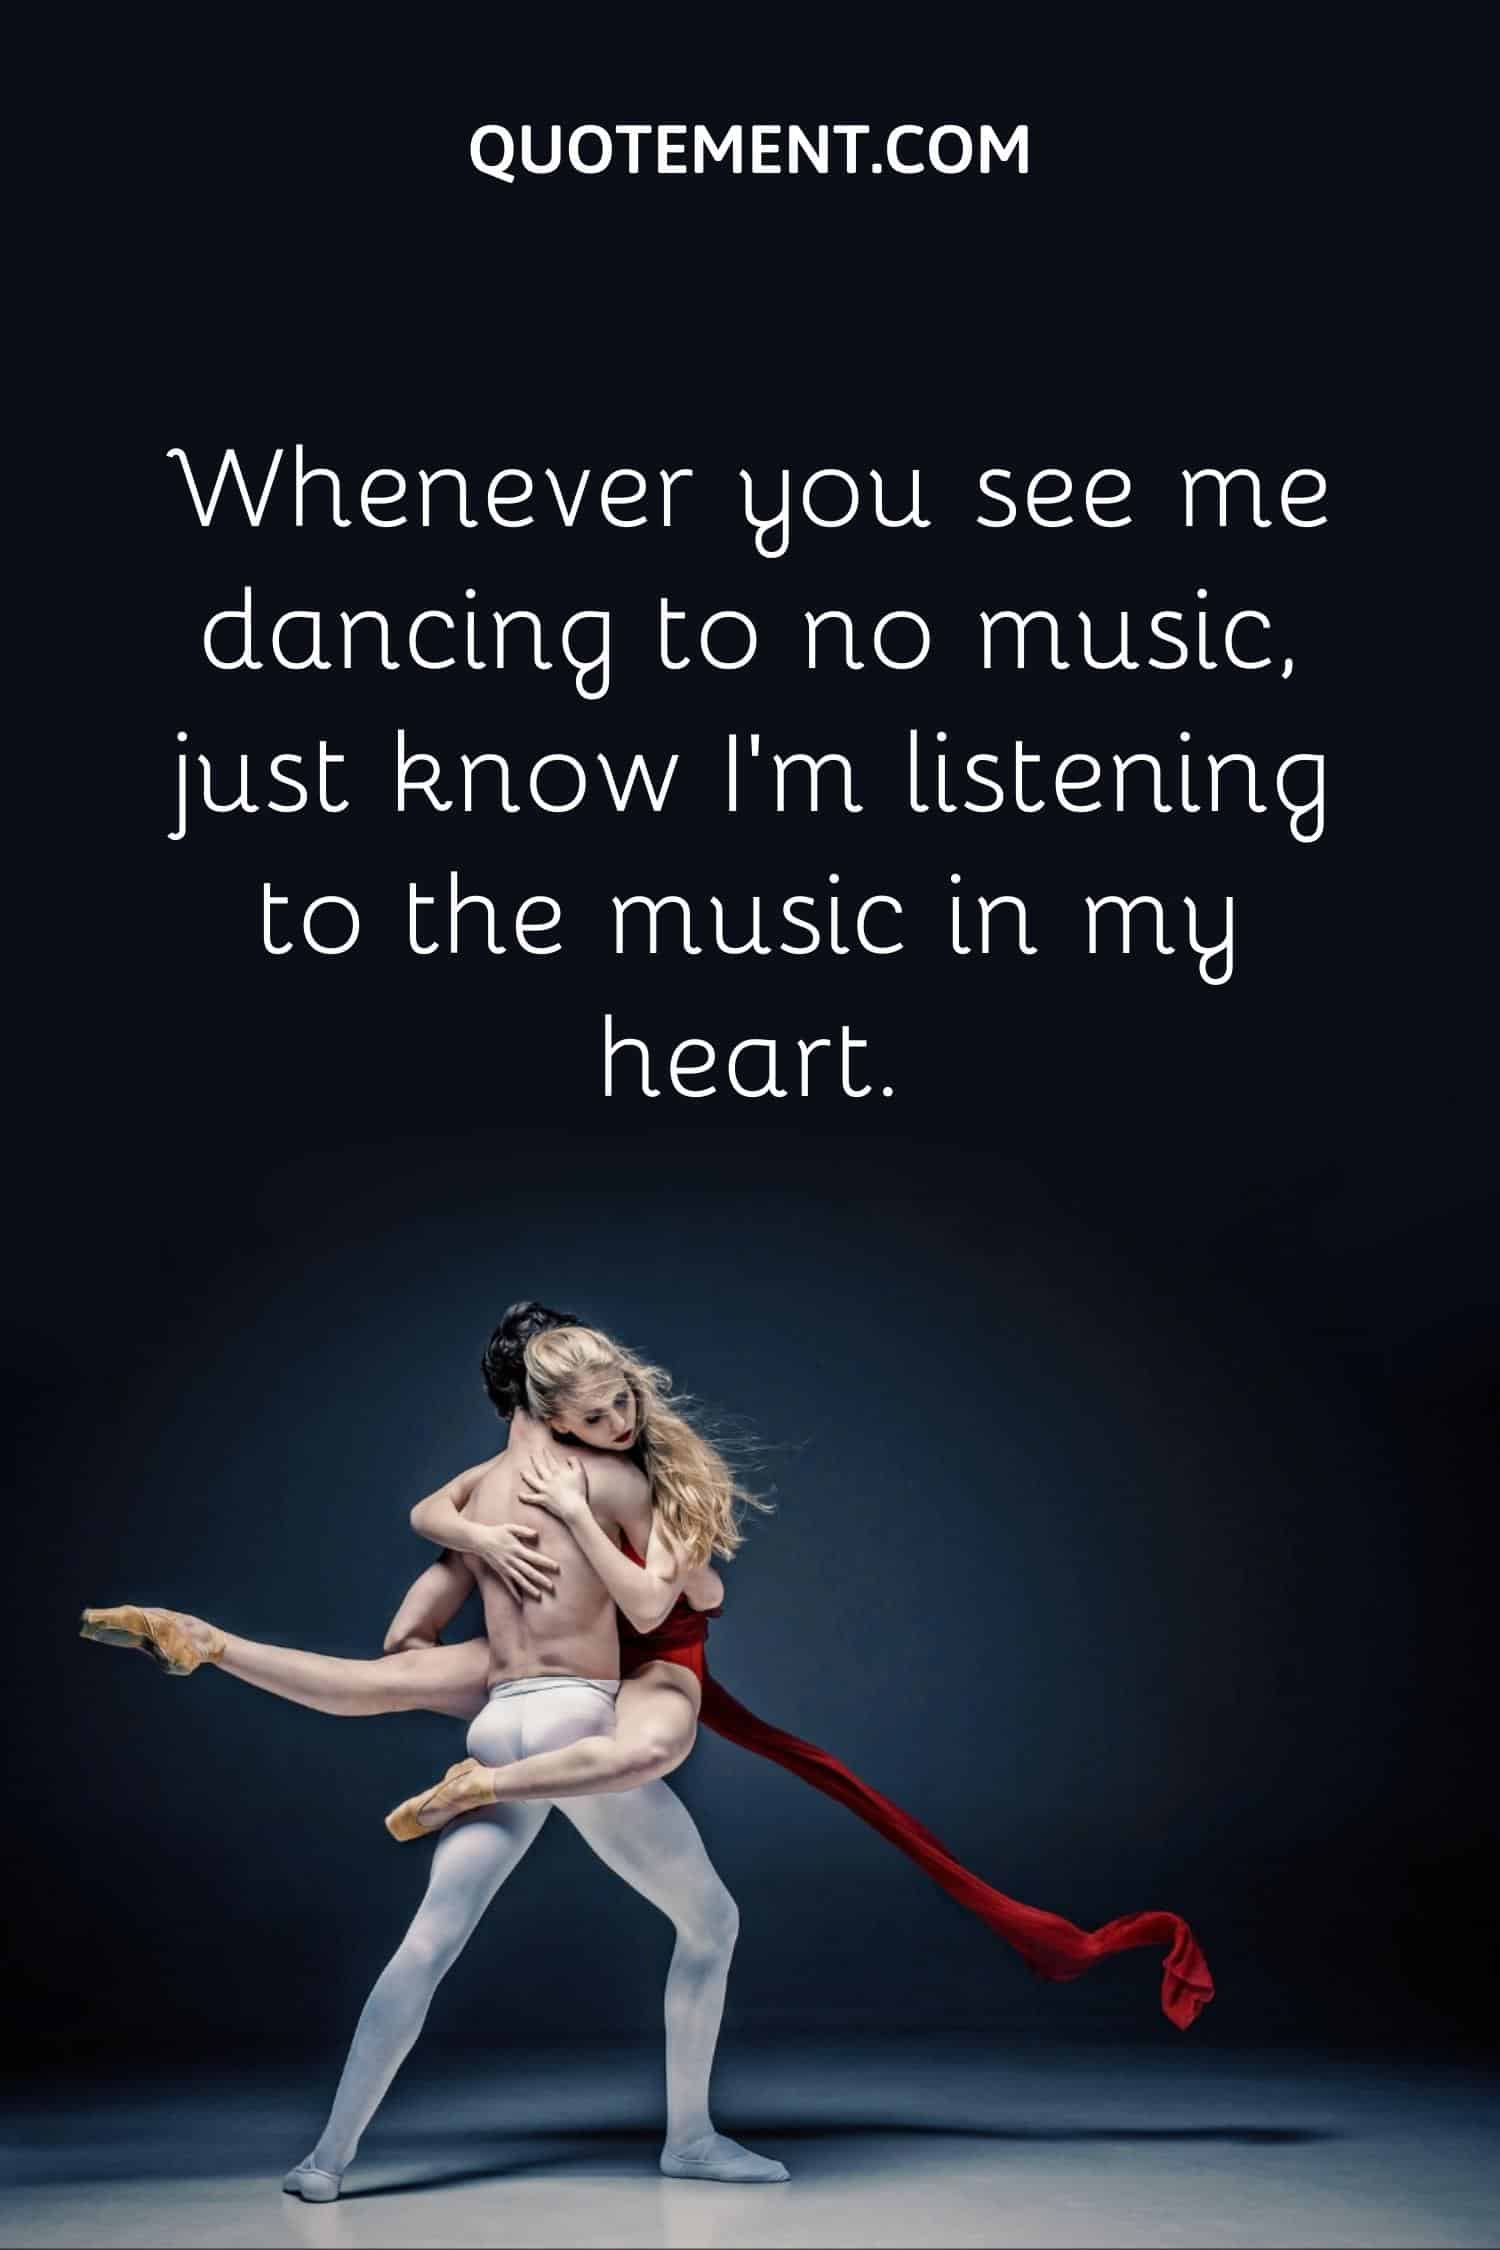 Whenever you see me dancing to no music, just know I’m listening to the music in my heart